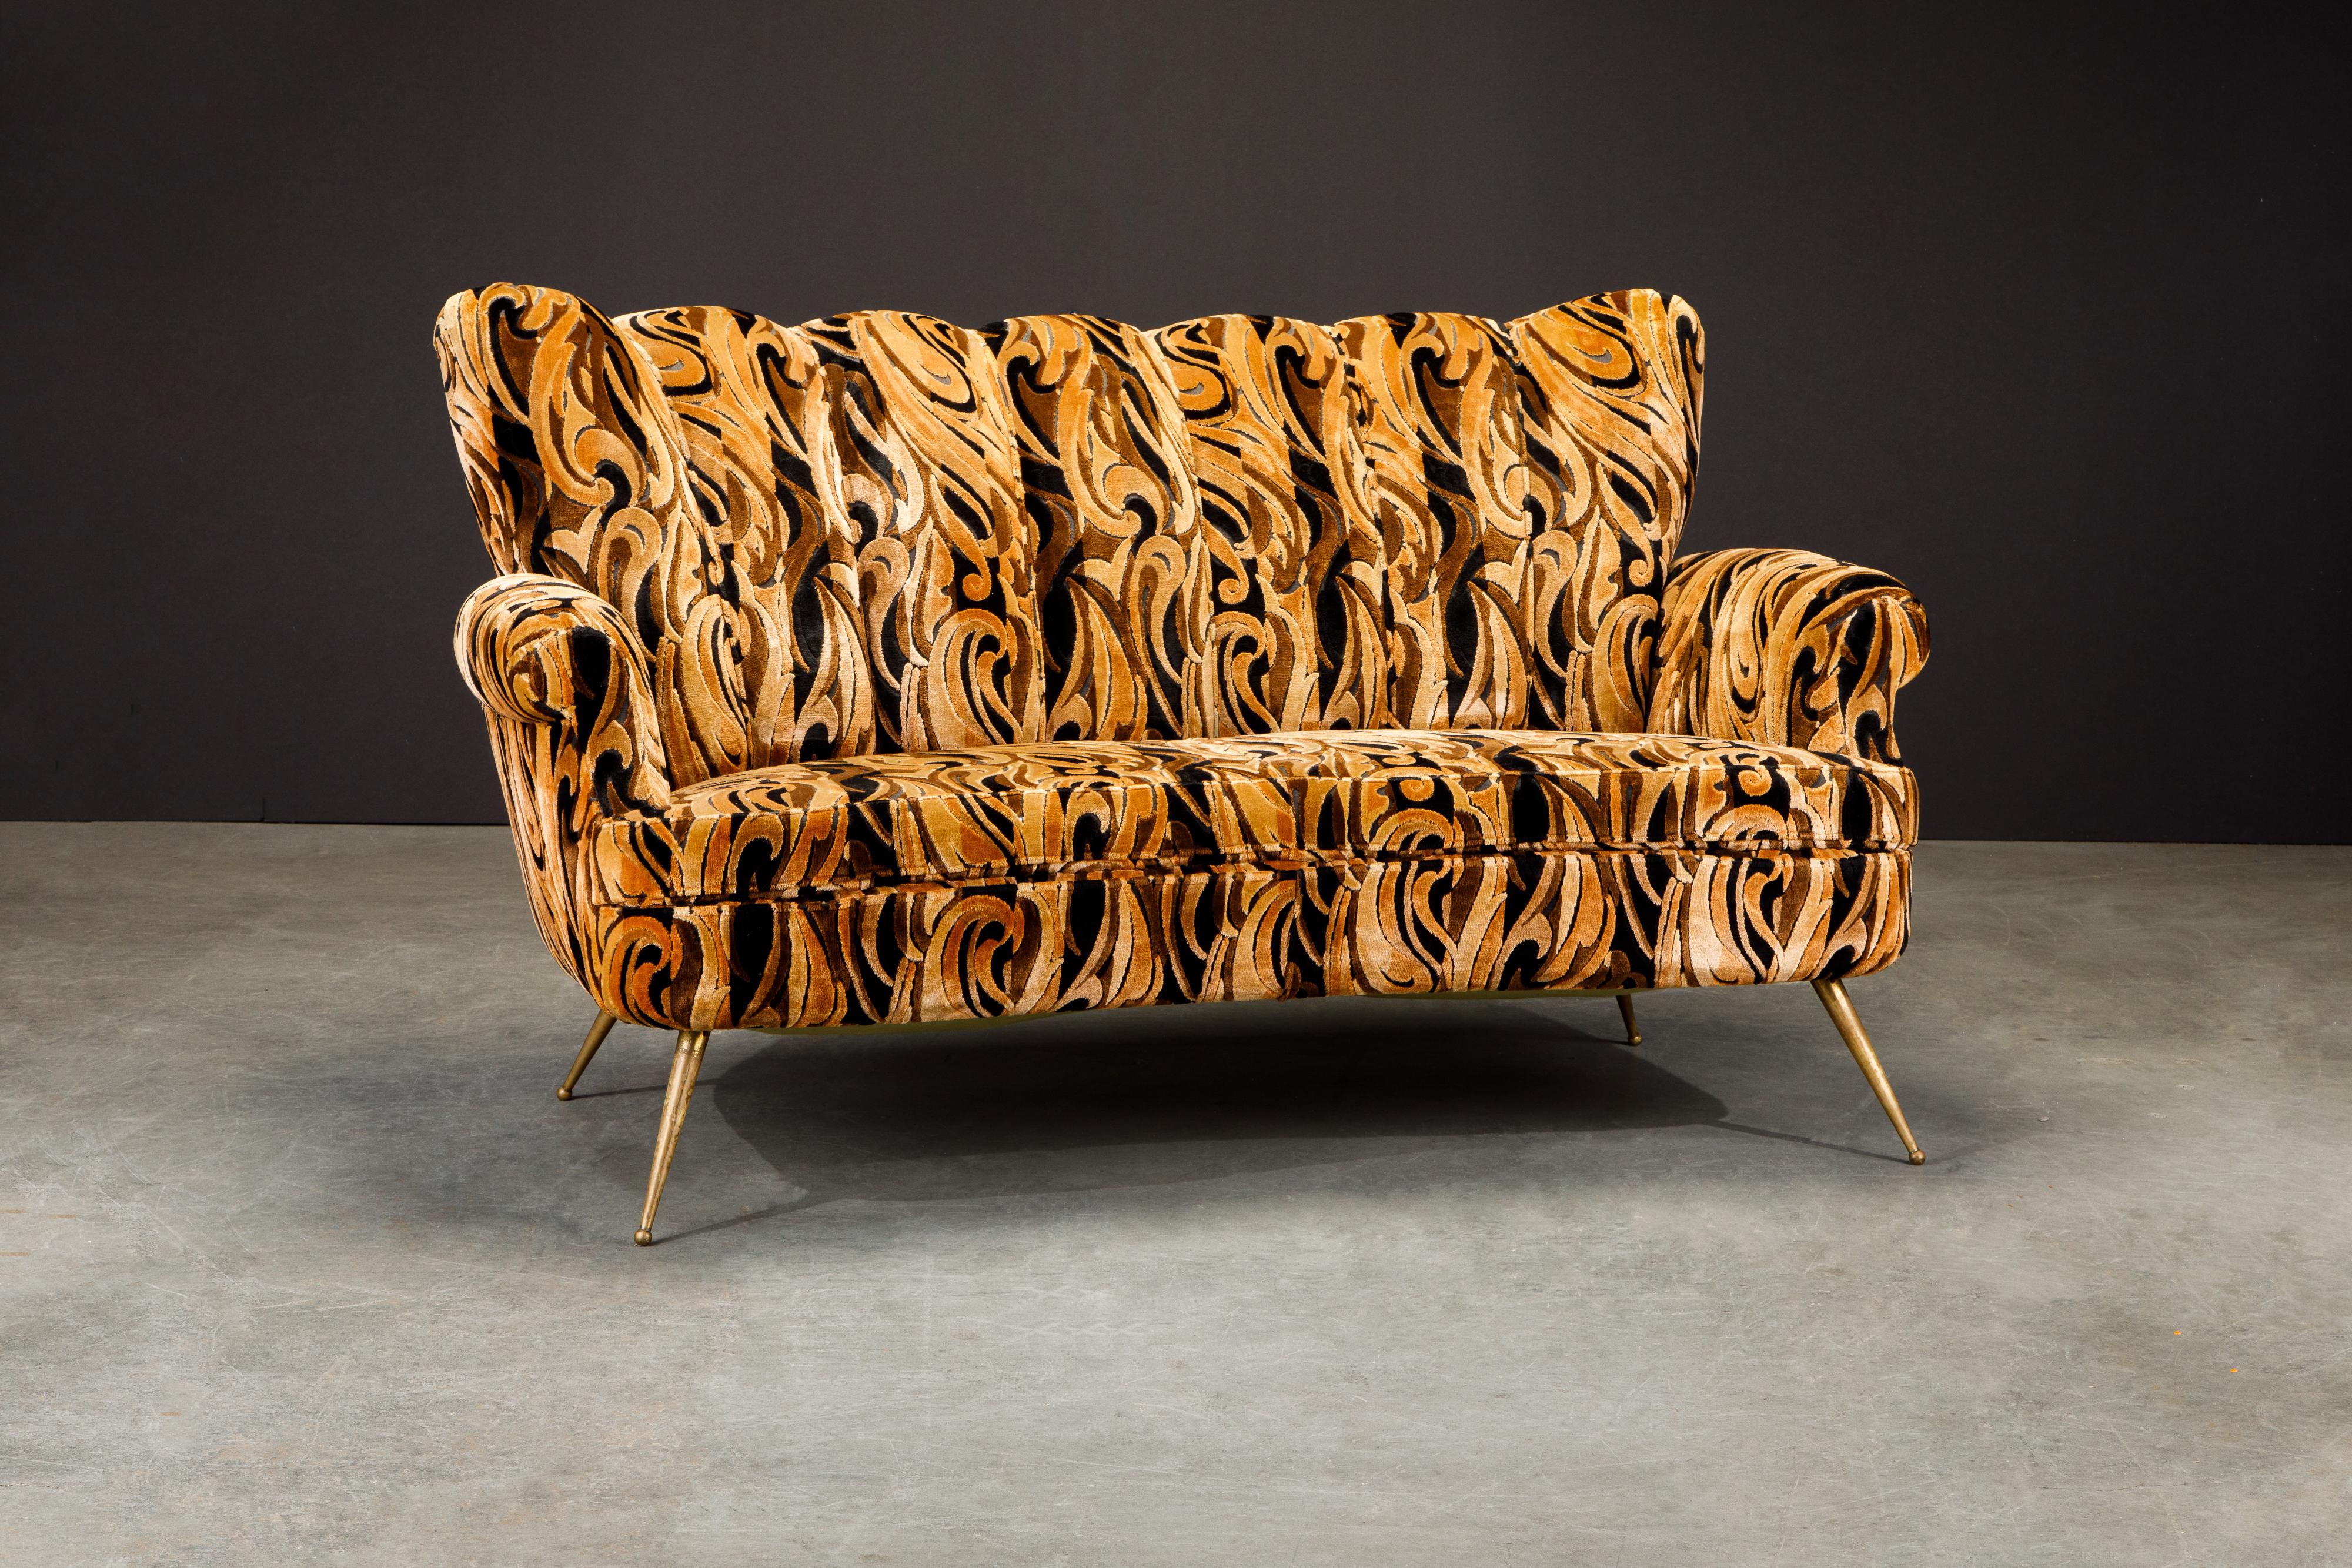 This gorgeous Italian Mid-Century Modern loveseat features a channel tufted fluted cushioned back over a curve shaped seat in brown and black cut velvet upholstery rising on tapered brass legs. Such groovy fabric, get this for your interior design